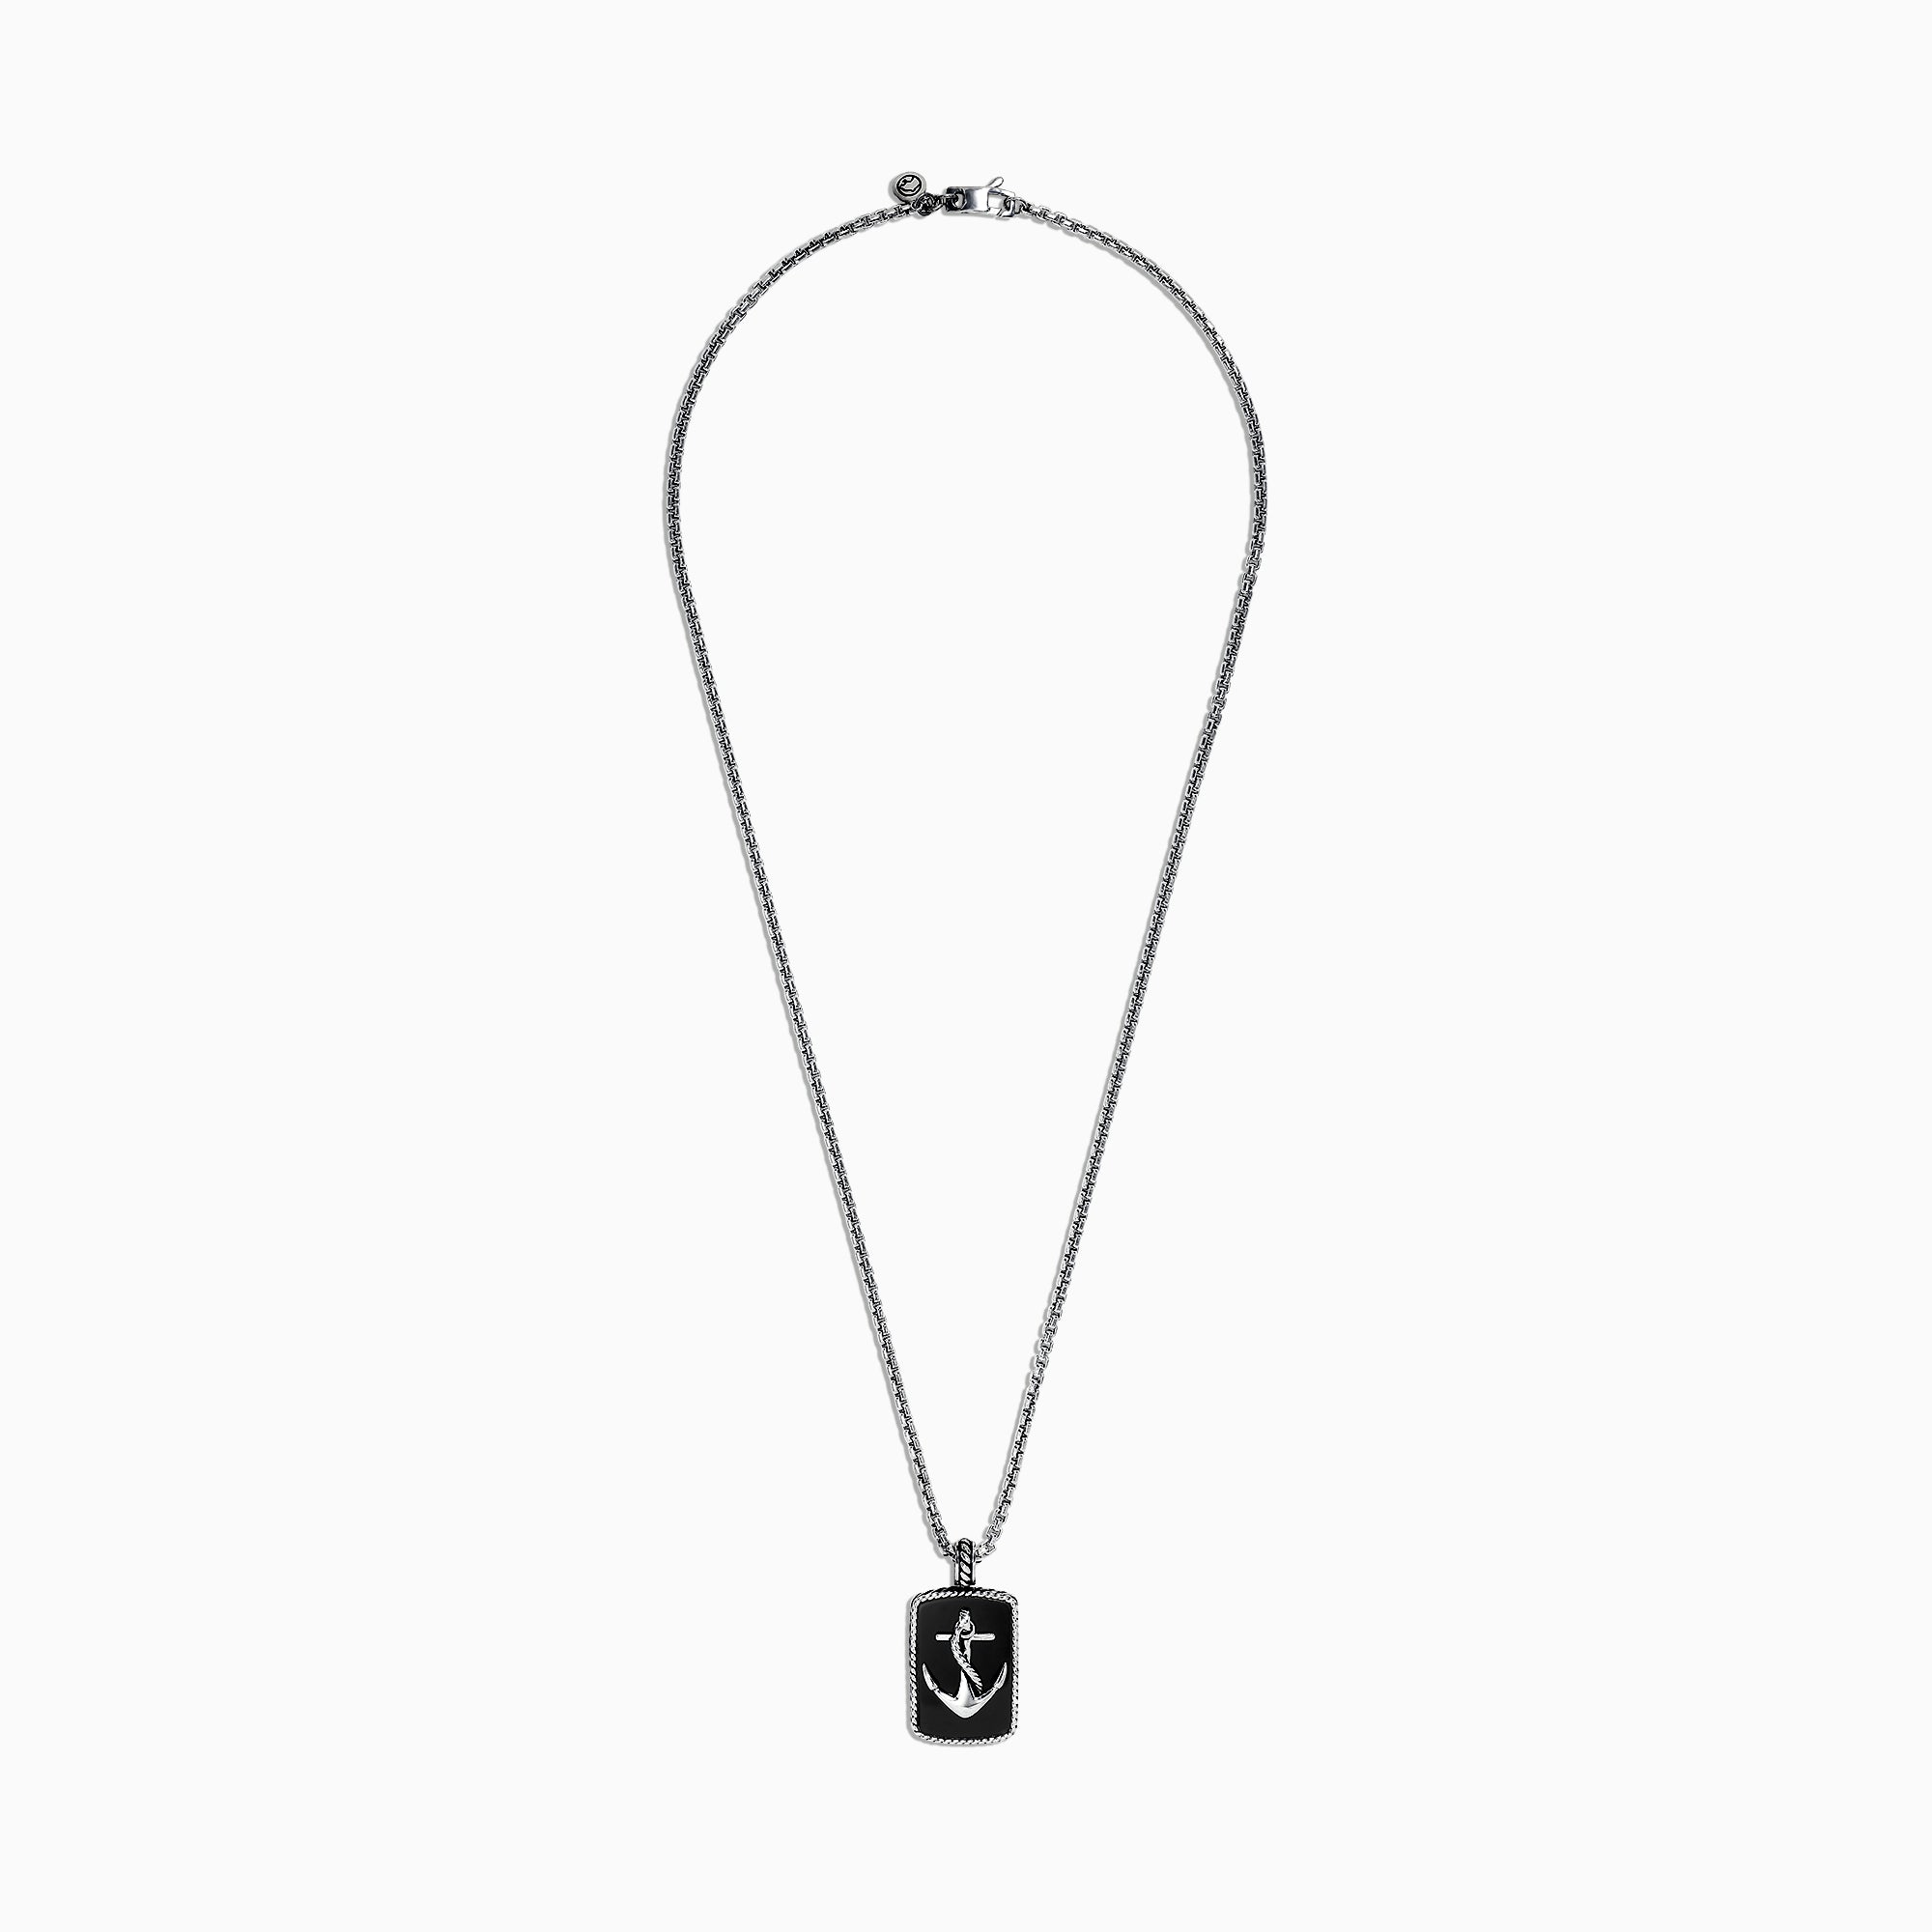 Buy Silver Plated Arrow Charm Men Necklace @ Best Price 999